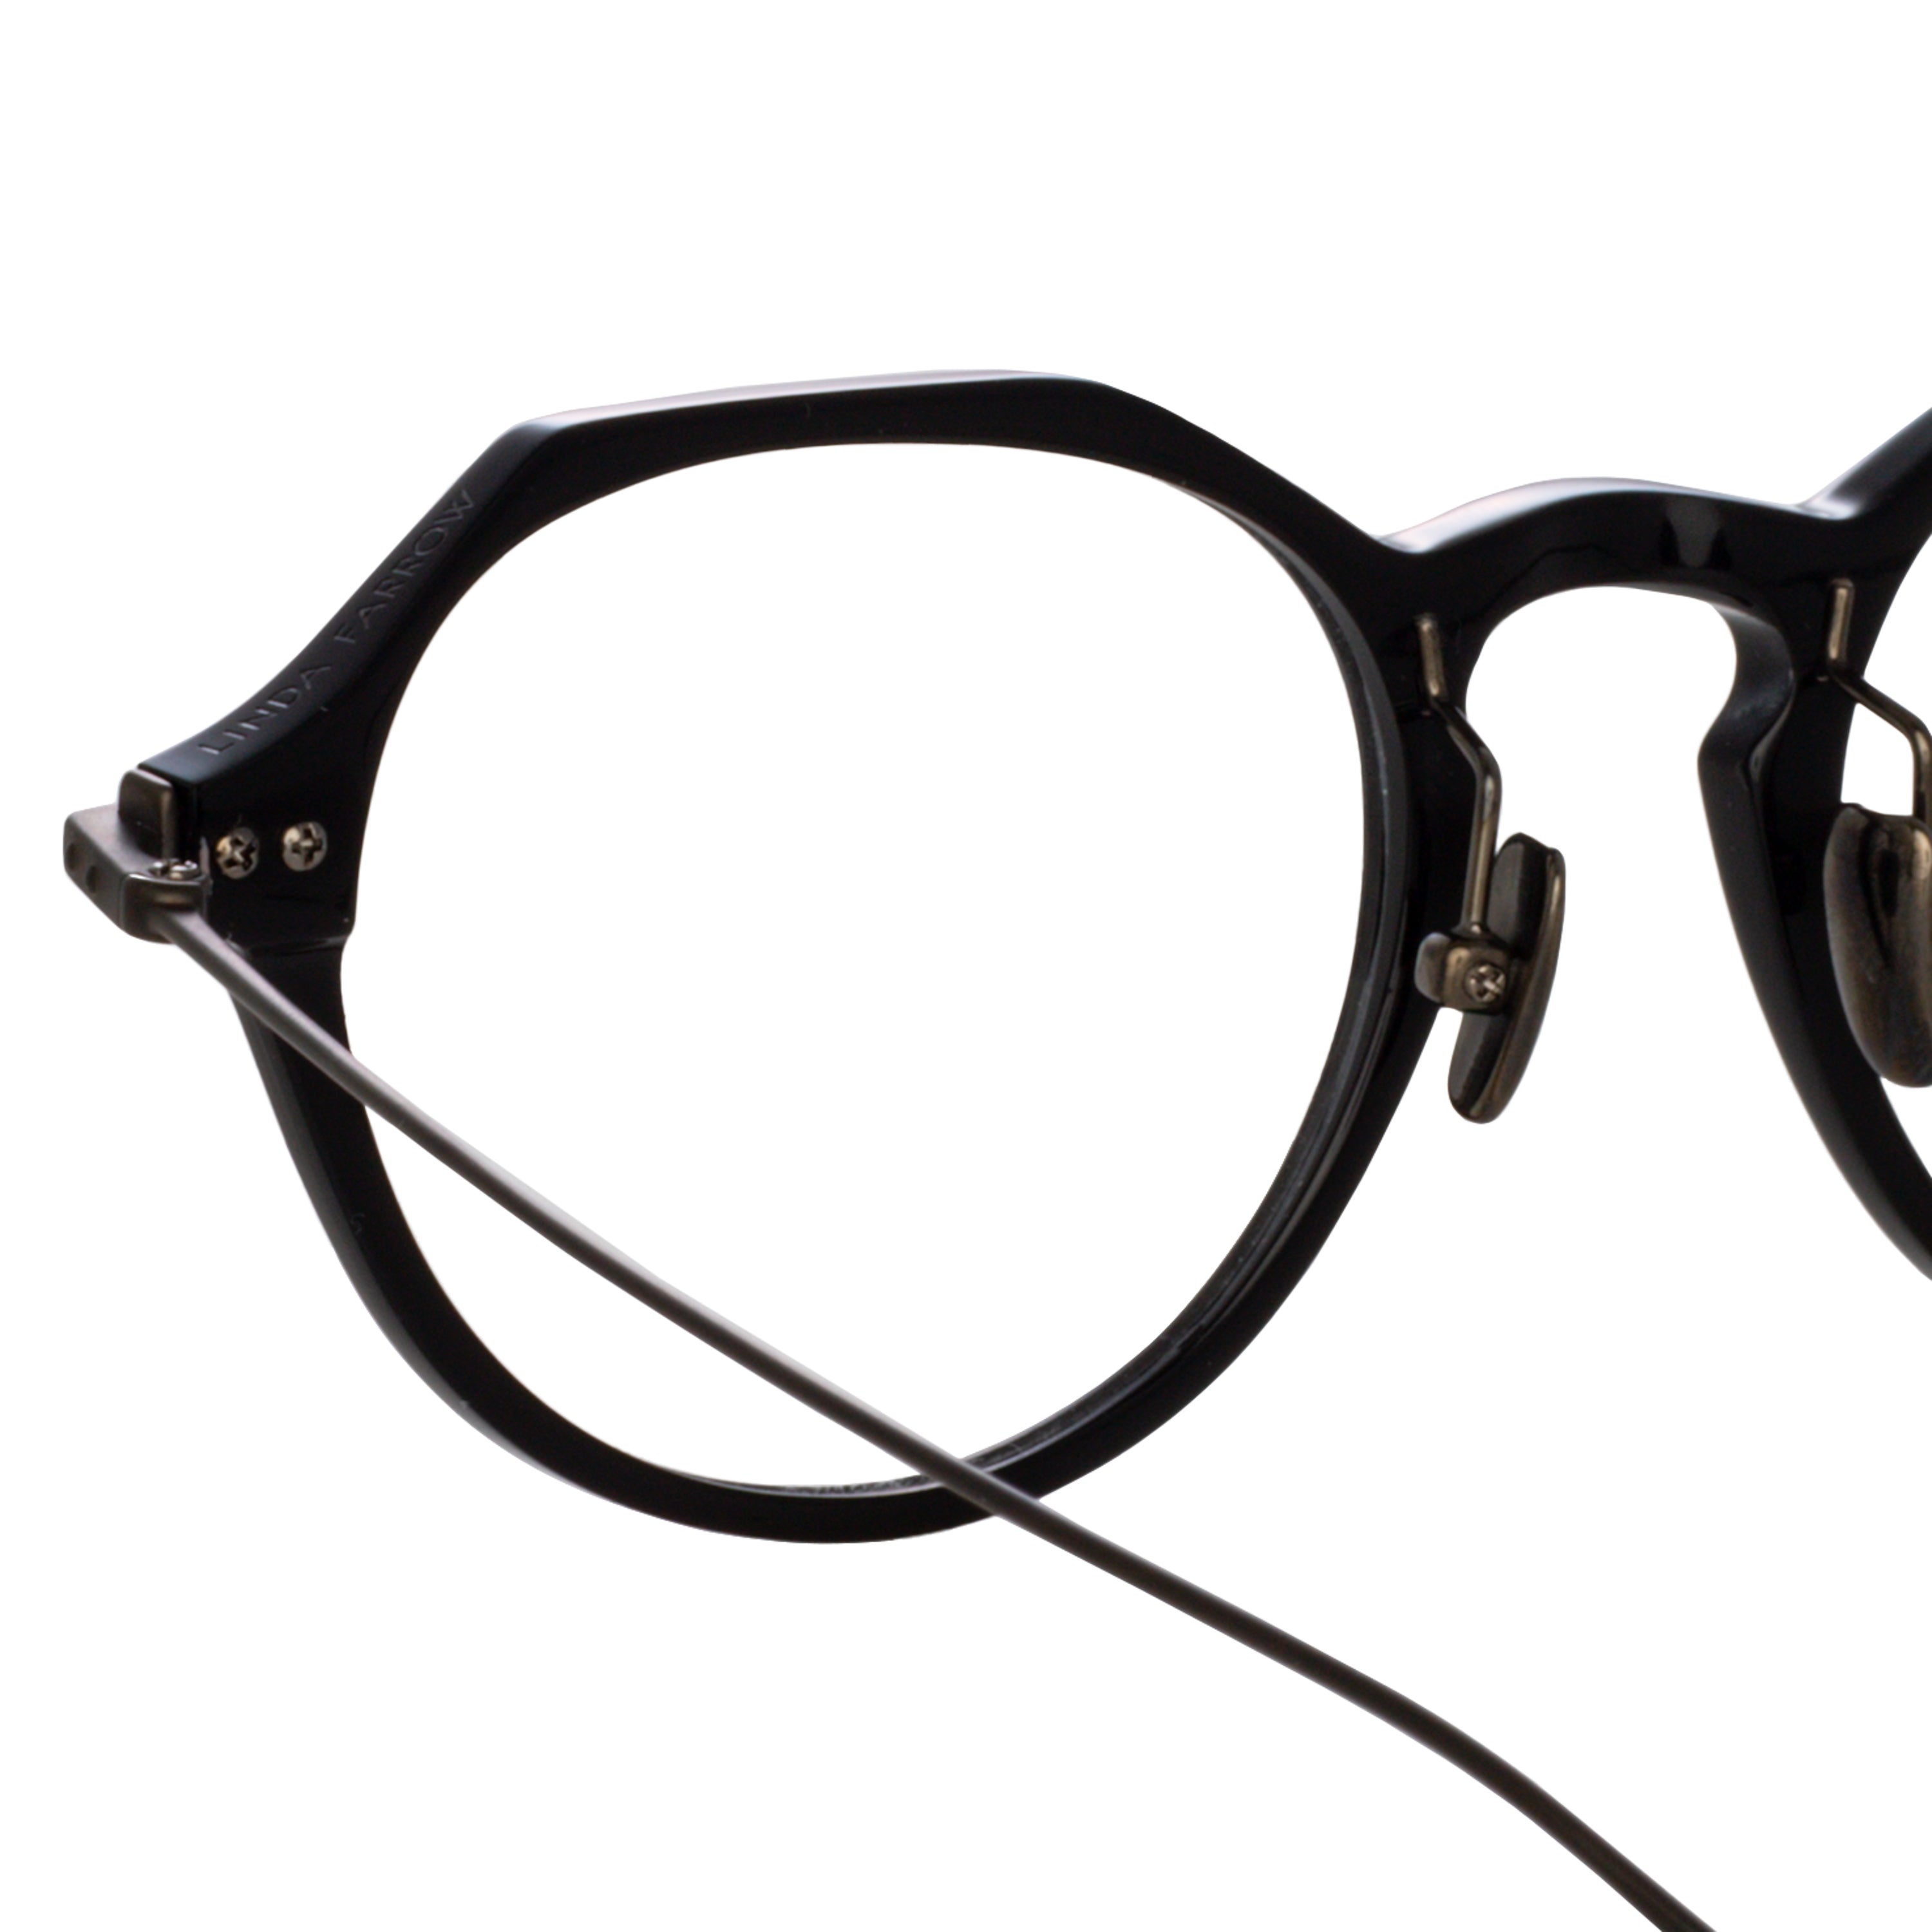 WREN OVAL OPTICAL A FRAME IN BLACK AND NICKEL - 5